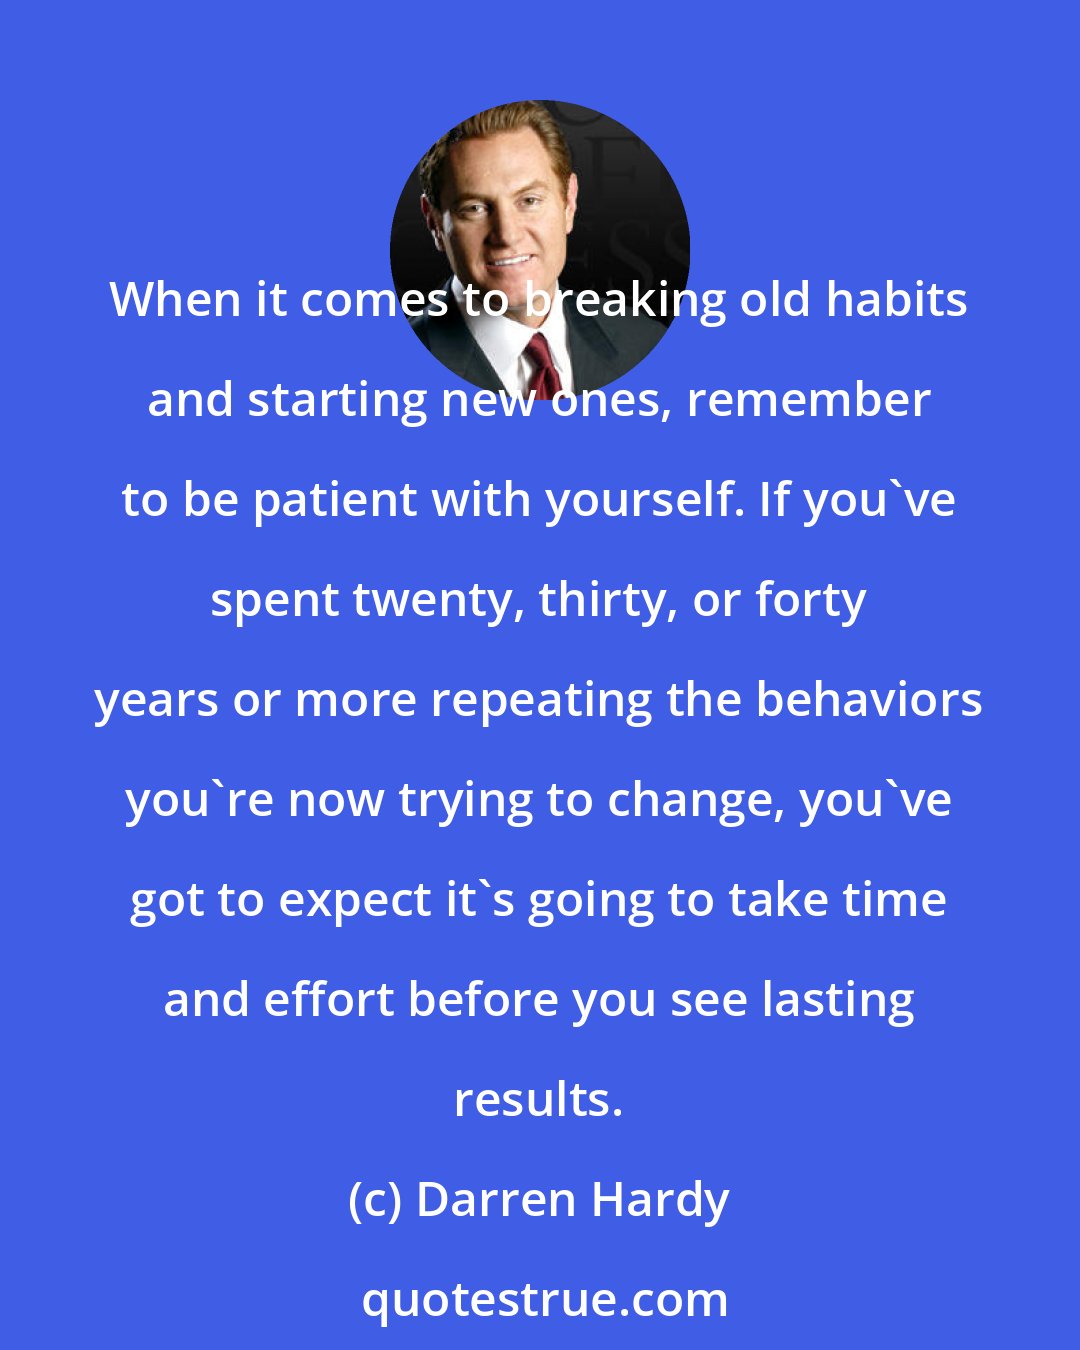 Darren Hardy: When it comes to breaking old habits and starting new ones, remember to be patient with yourself. If you've spent twenty, thirty, or forty years or more repeating the behaviors you're now trying to change, you've got to expect it's going to take time and effort before you see lasting results.